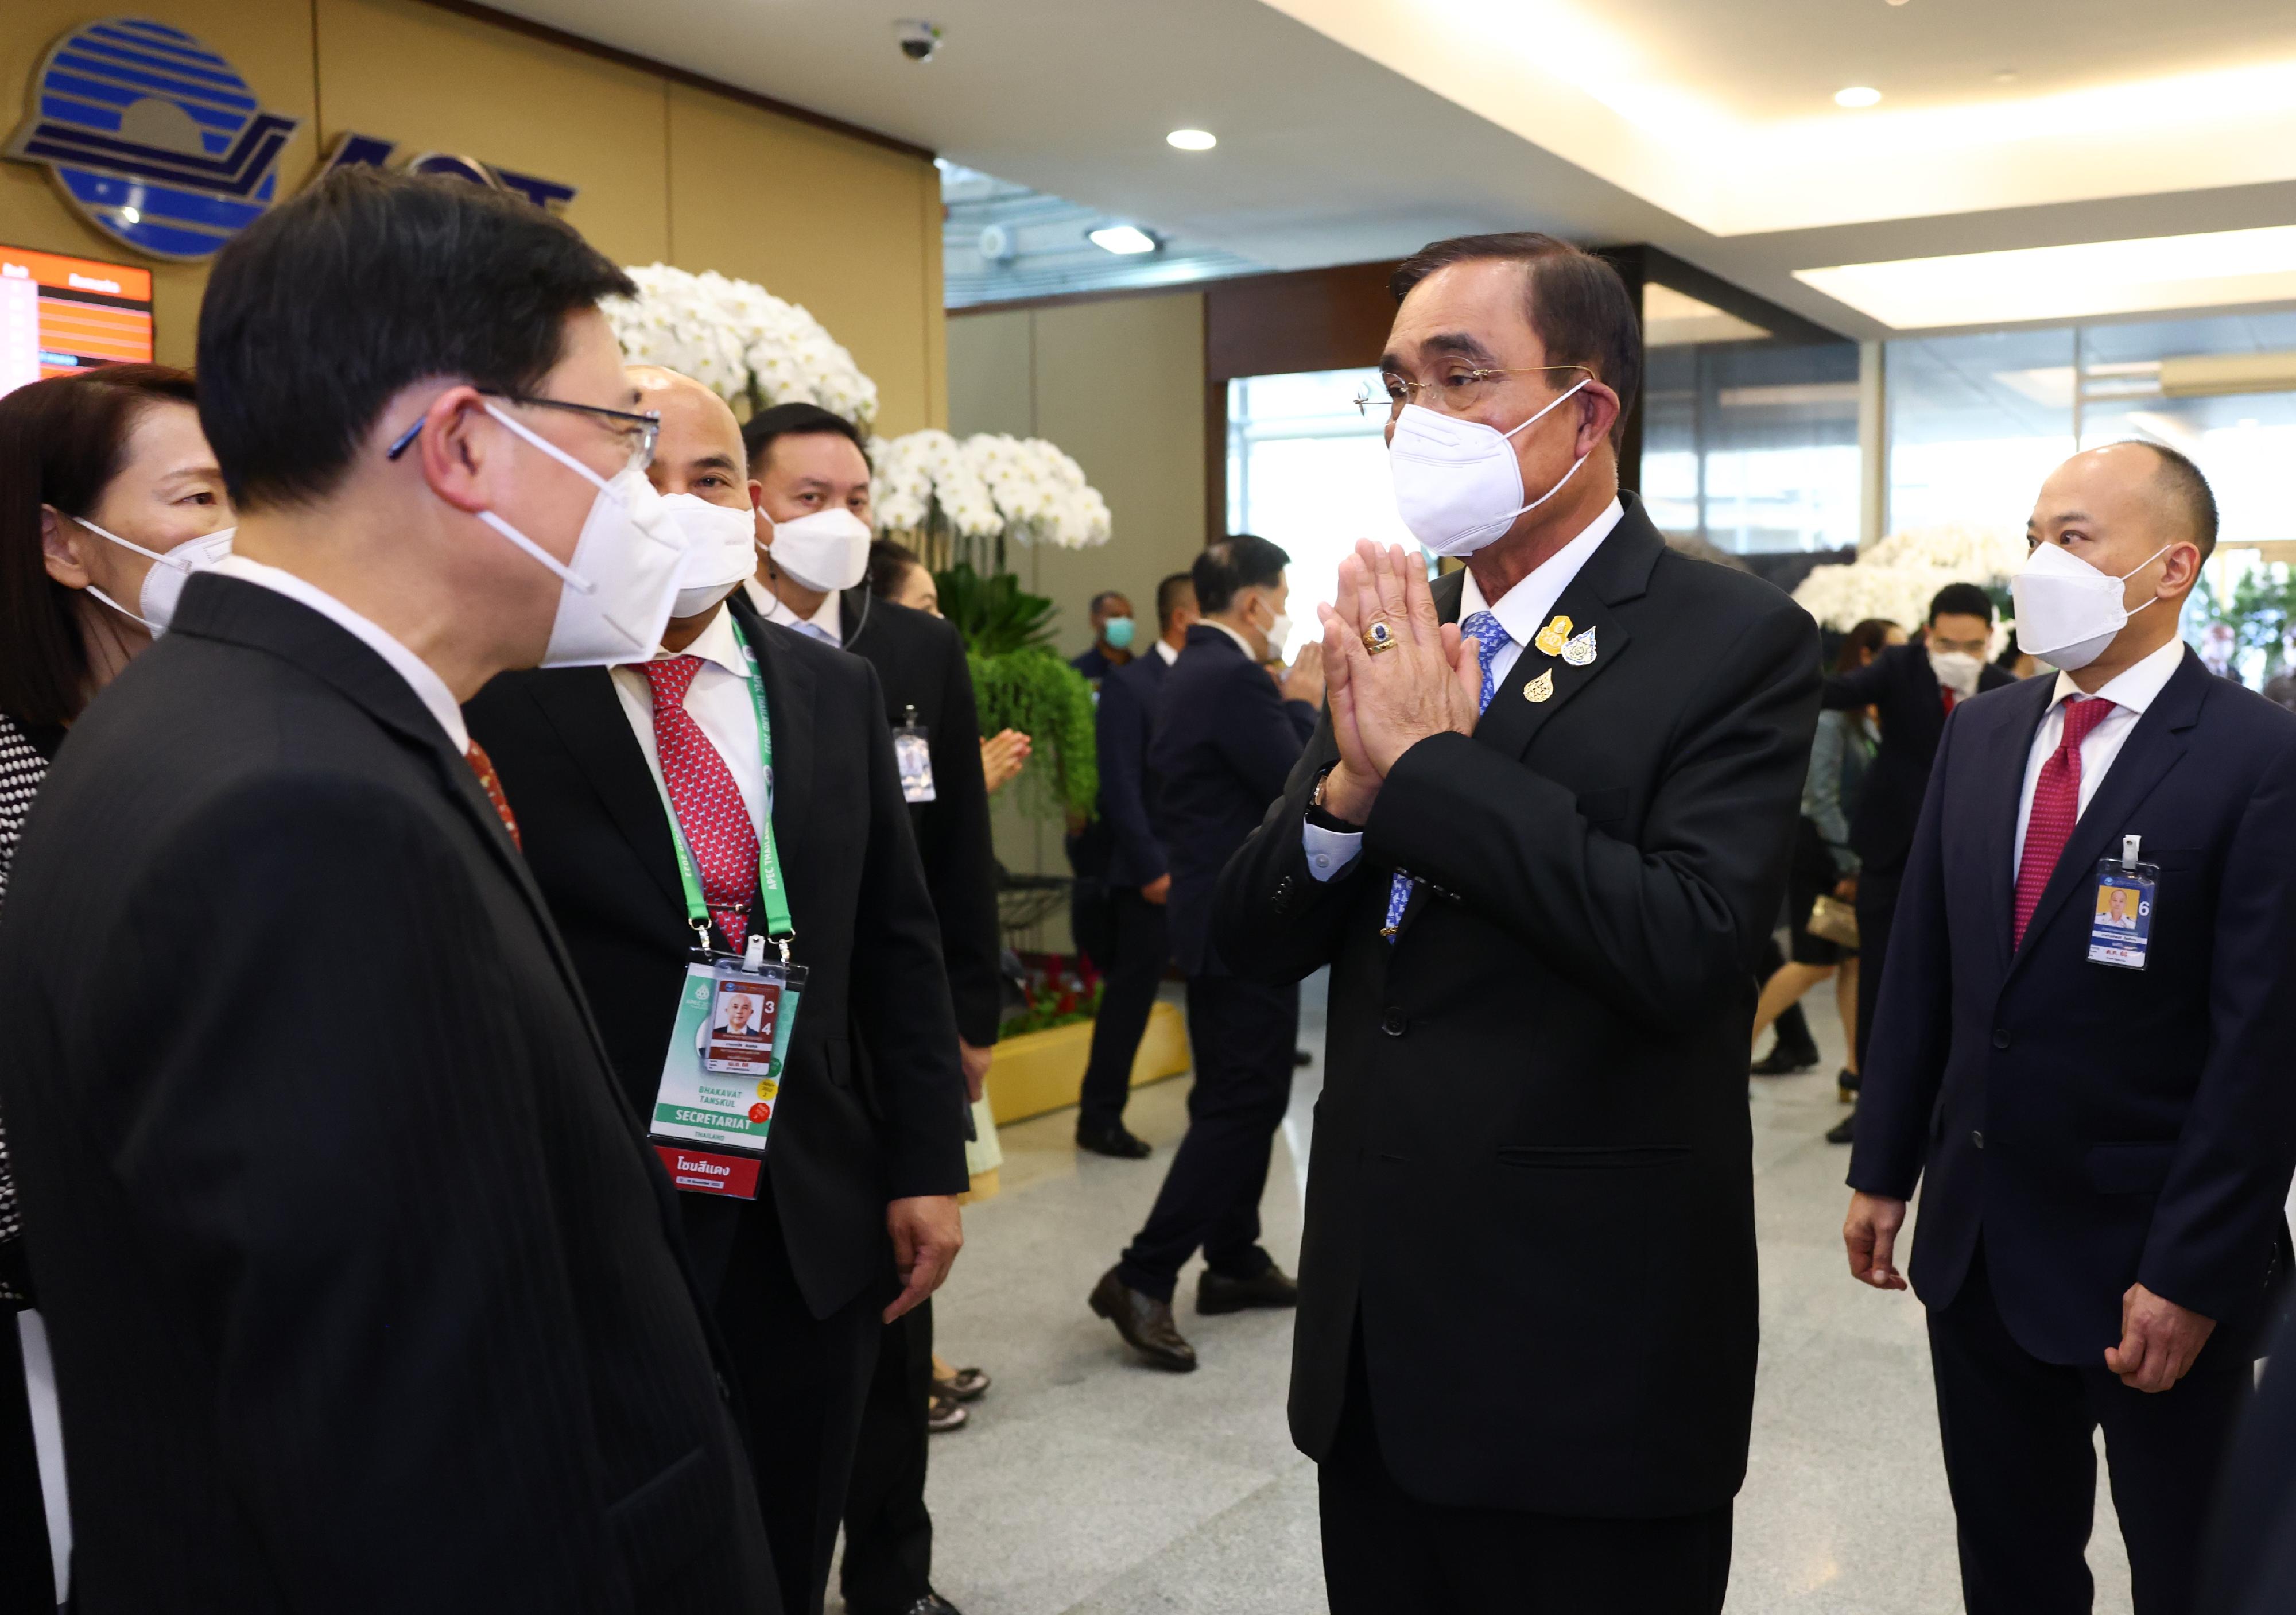 The Chief Executive, Mr John Lee (second left), meets with the Prime Minister of Thailand, Mr Prayut Chan-o-cha (second right), at Suvarnabhumi International Airport in Bangkok, Thailand, today (November 17).